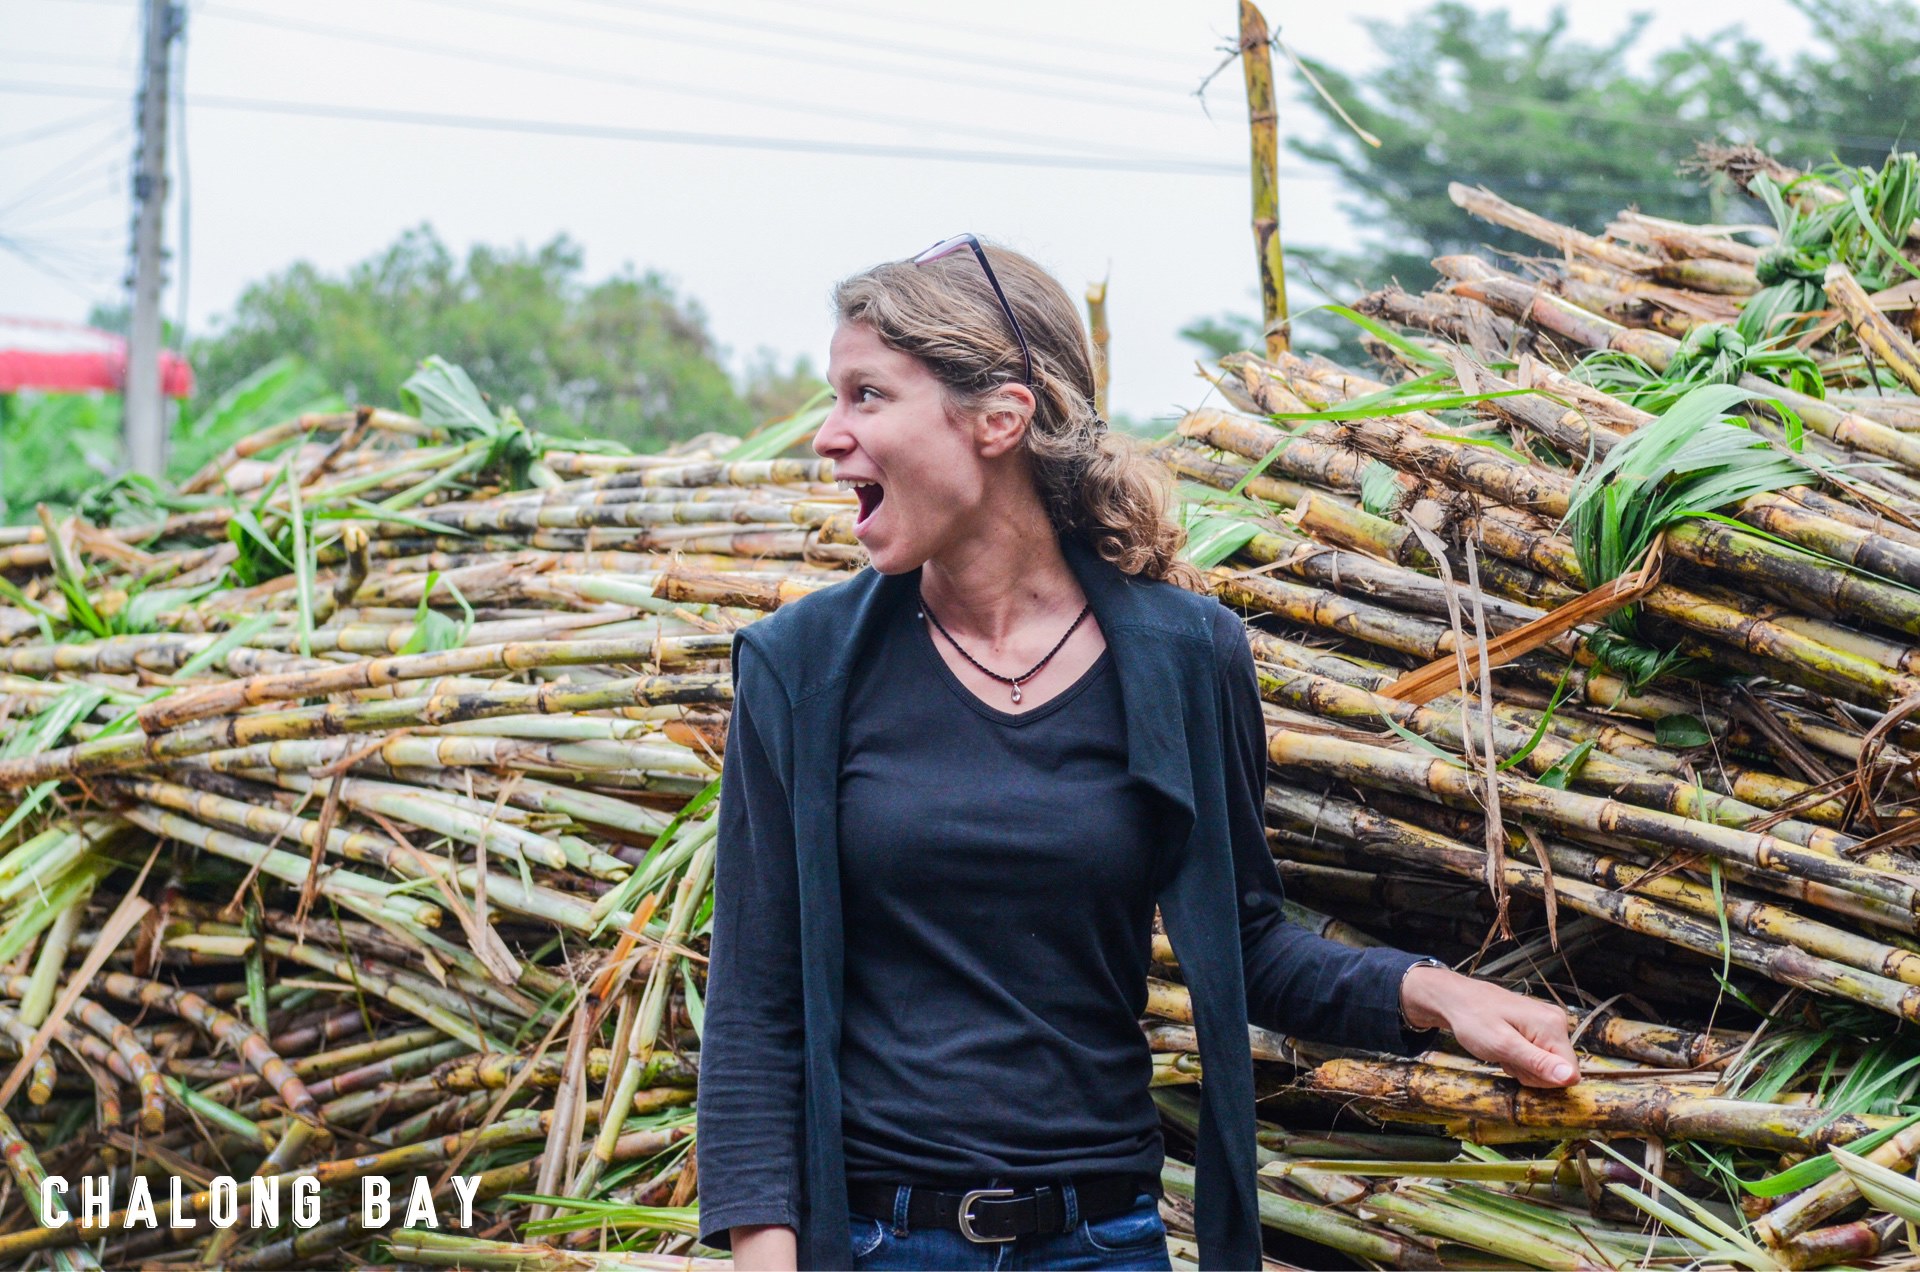 Marine Lucchini makes a face next to a pile of sugarcane stalks.